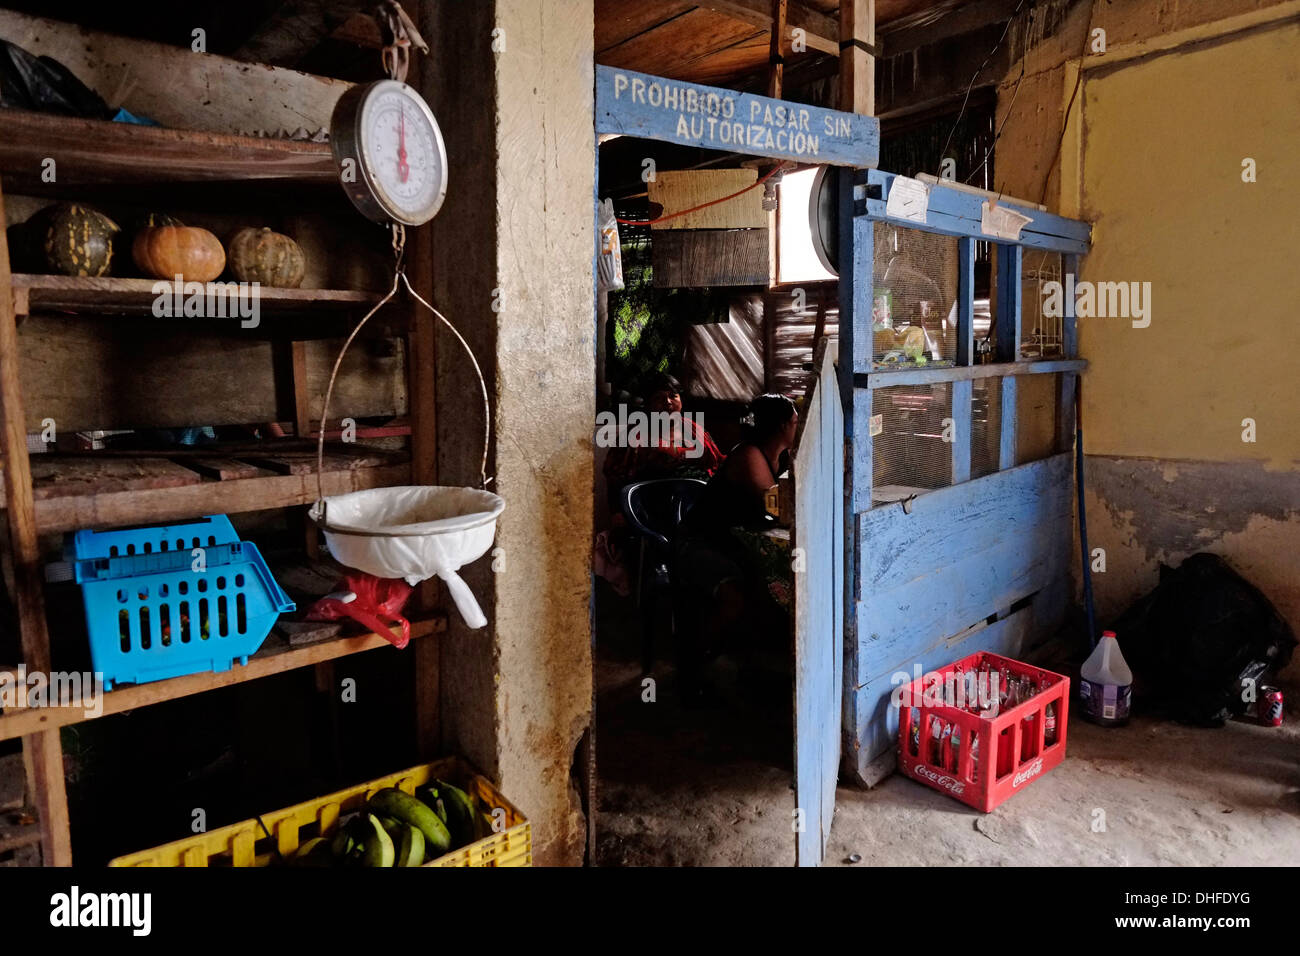 A grocery in Carti Sugtupu island village administered by Guna natives known as Kuna in the 'Comarca' (region) of the Guna Yala located in the archipelago of San Blas Blas islands in the Northeast of Panama facing the Caribbean Sea. Stock Photo